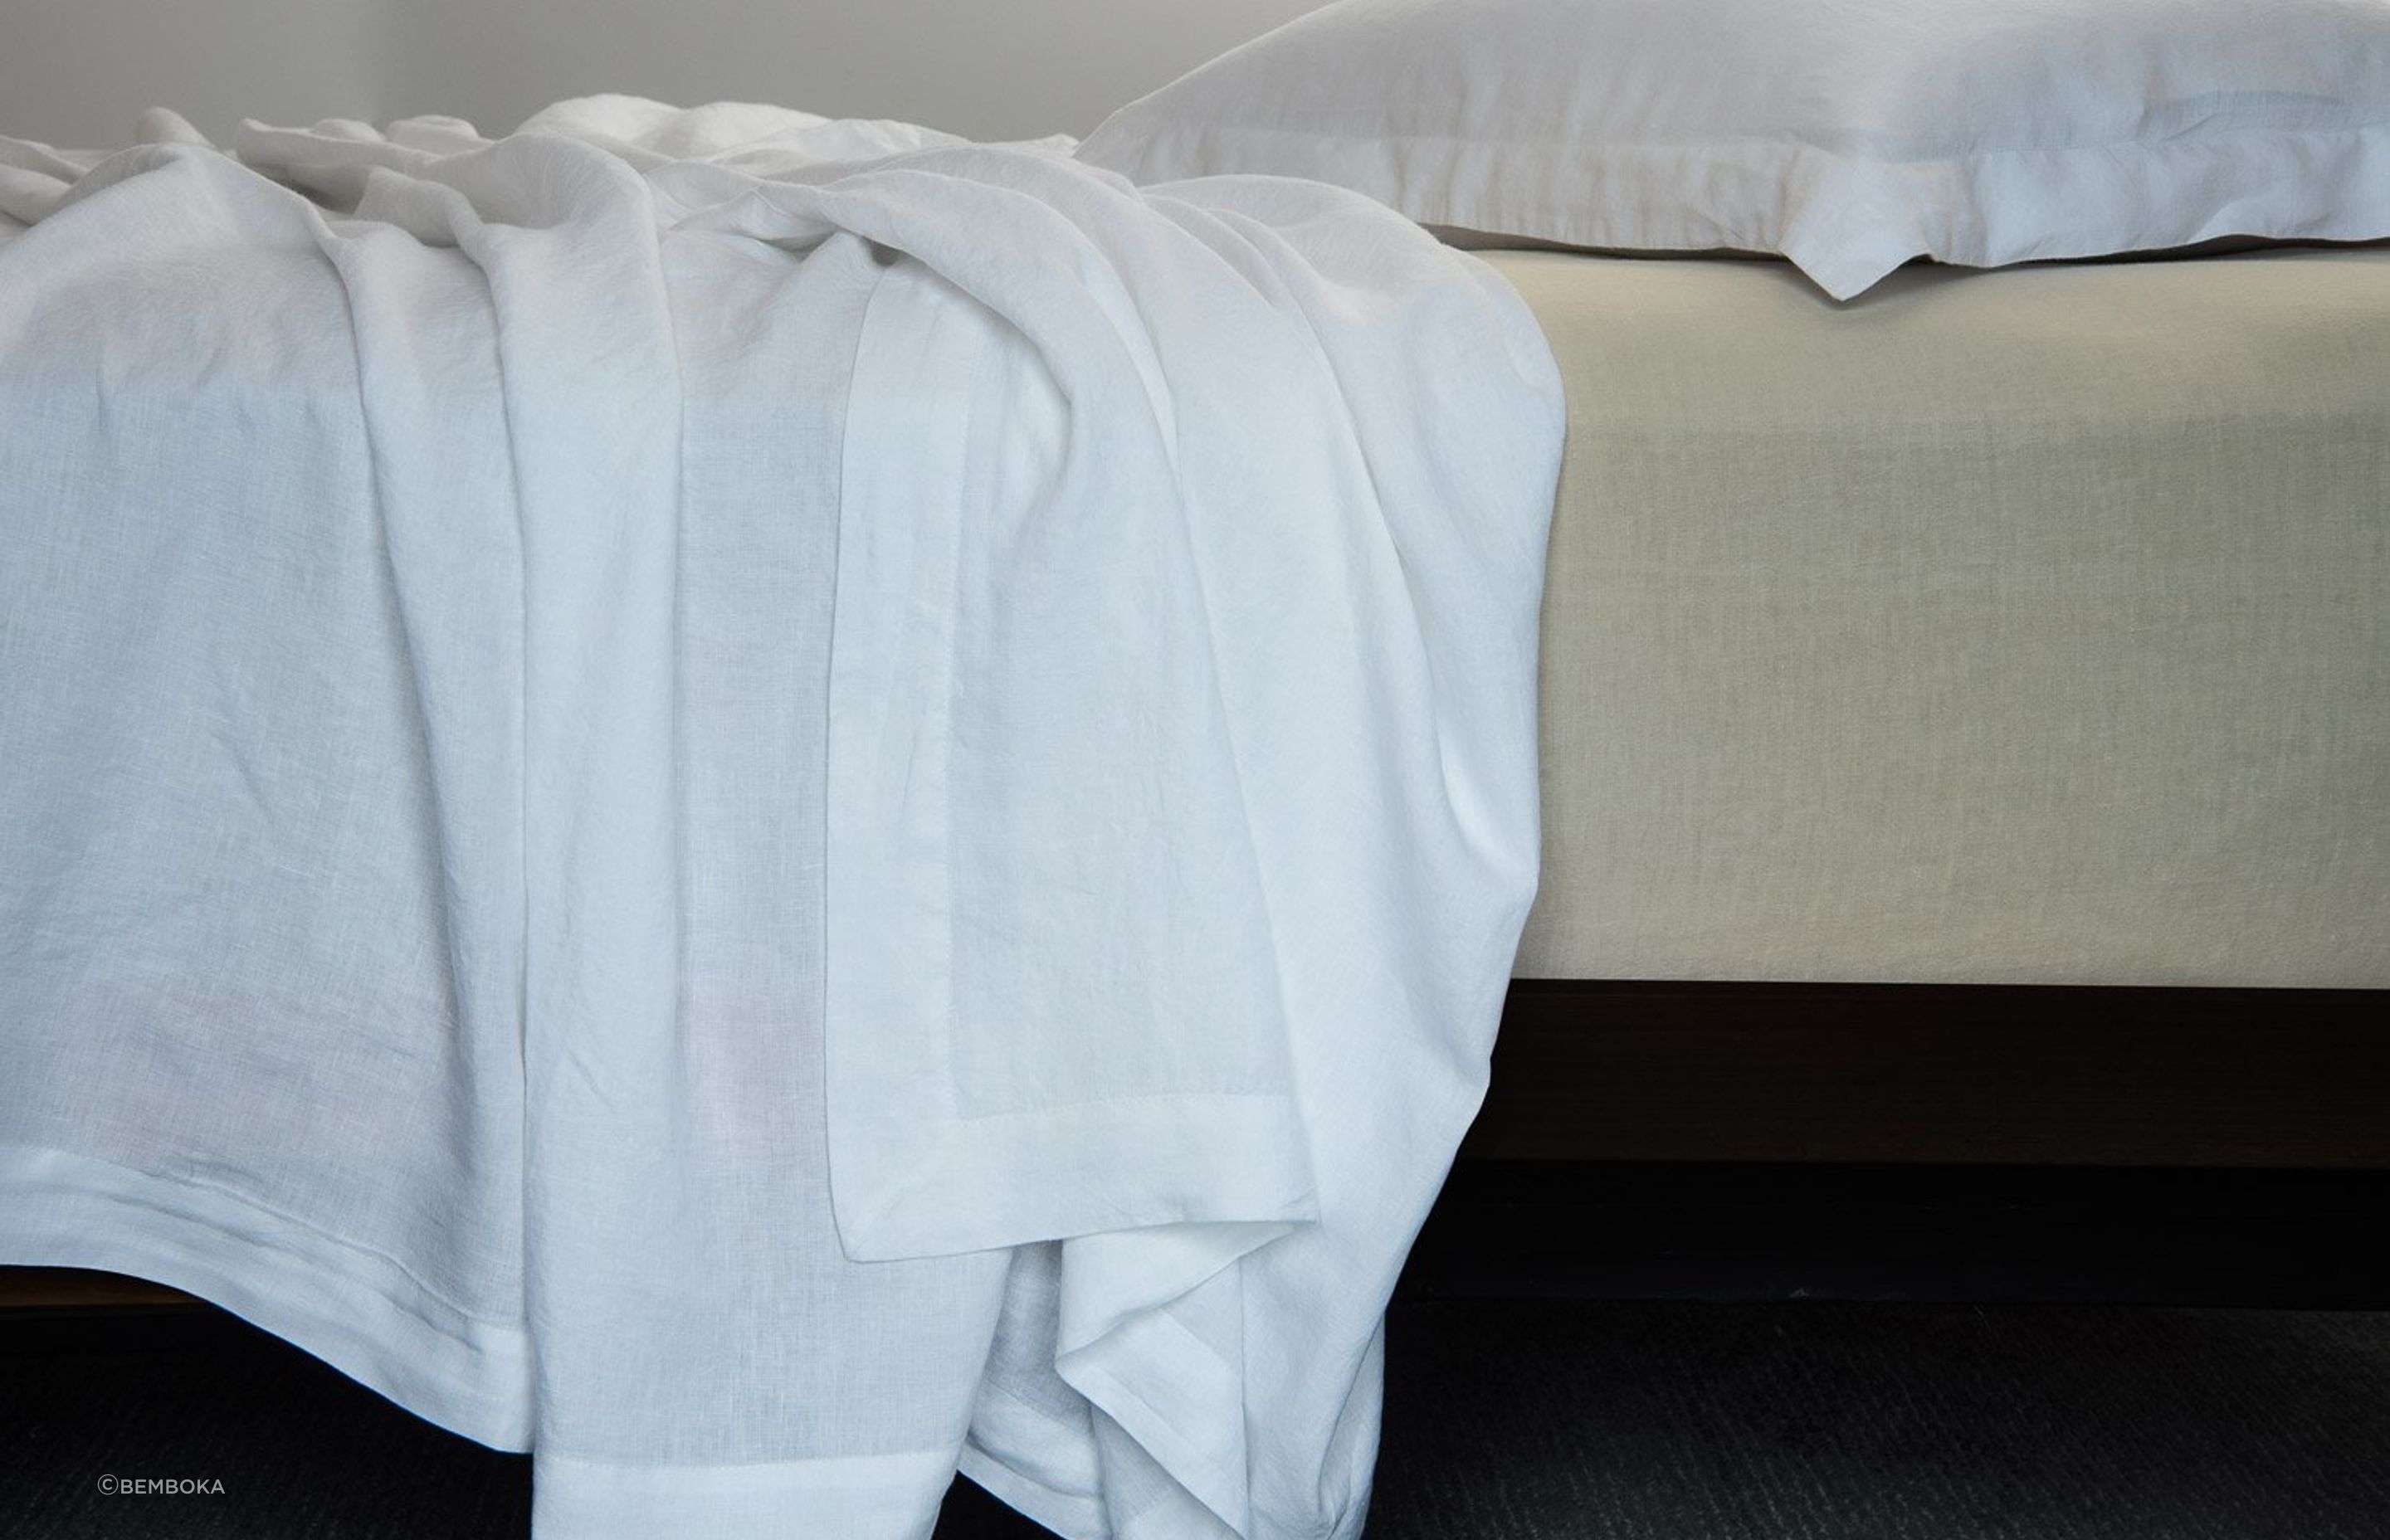  Flat sheets are a great lightweight bed covering option to use during summer. Featured product: Pure Linen King Single Flat Sheet Set